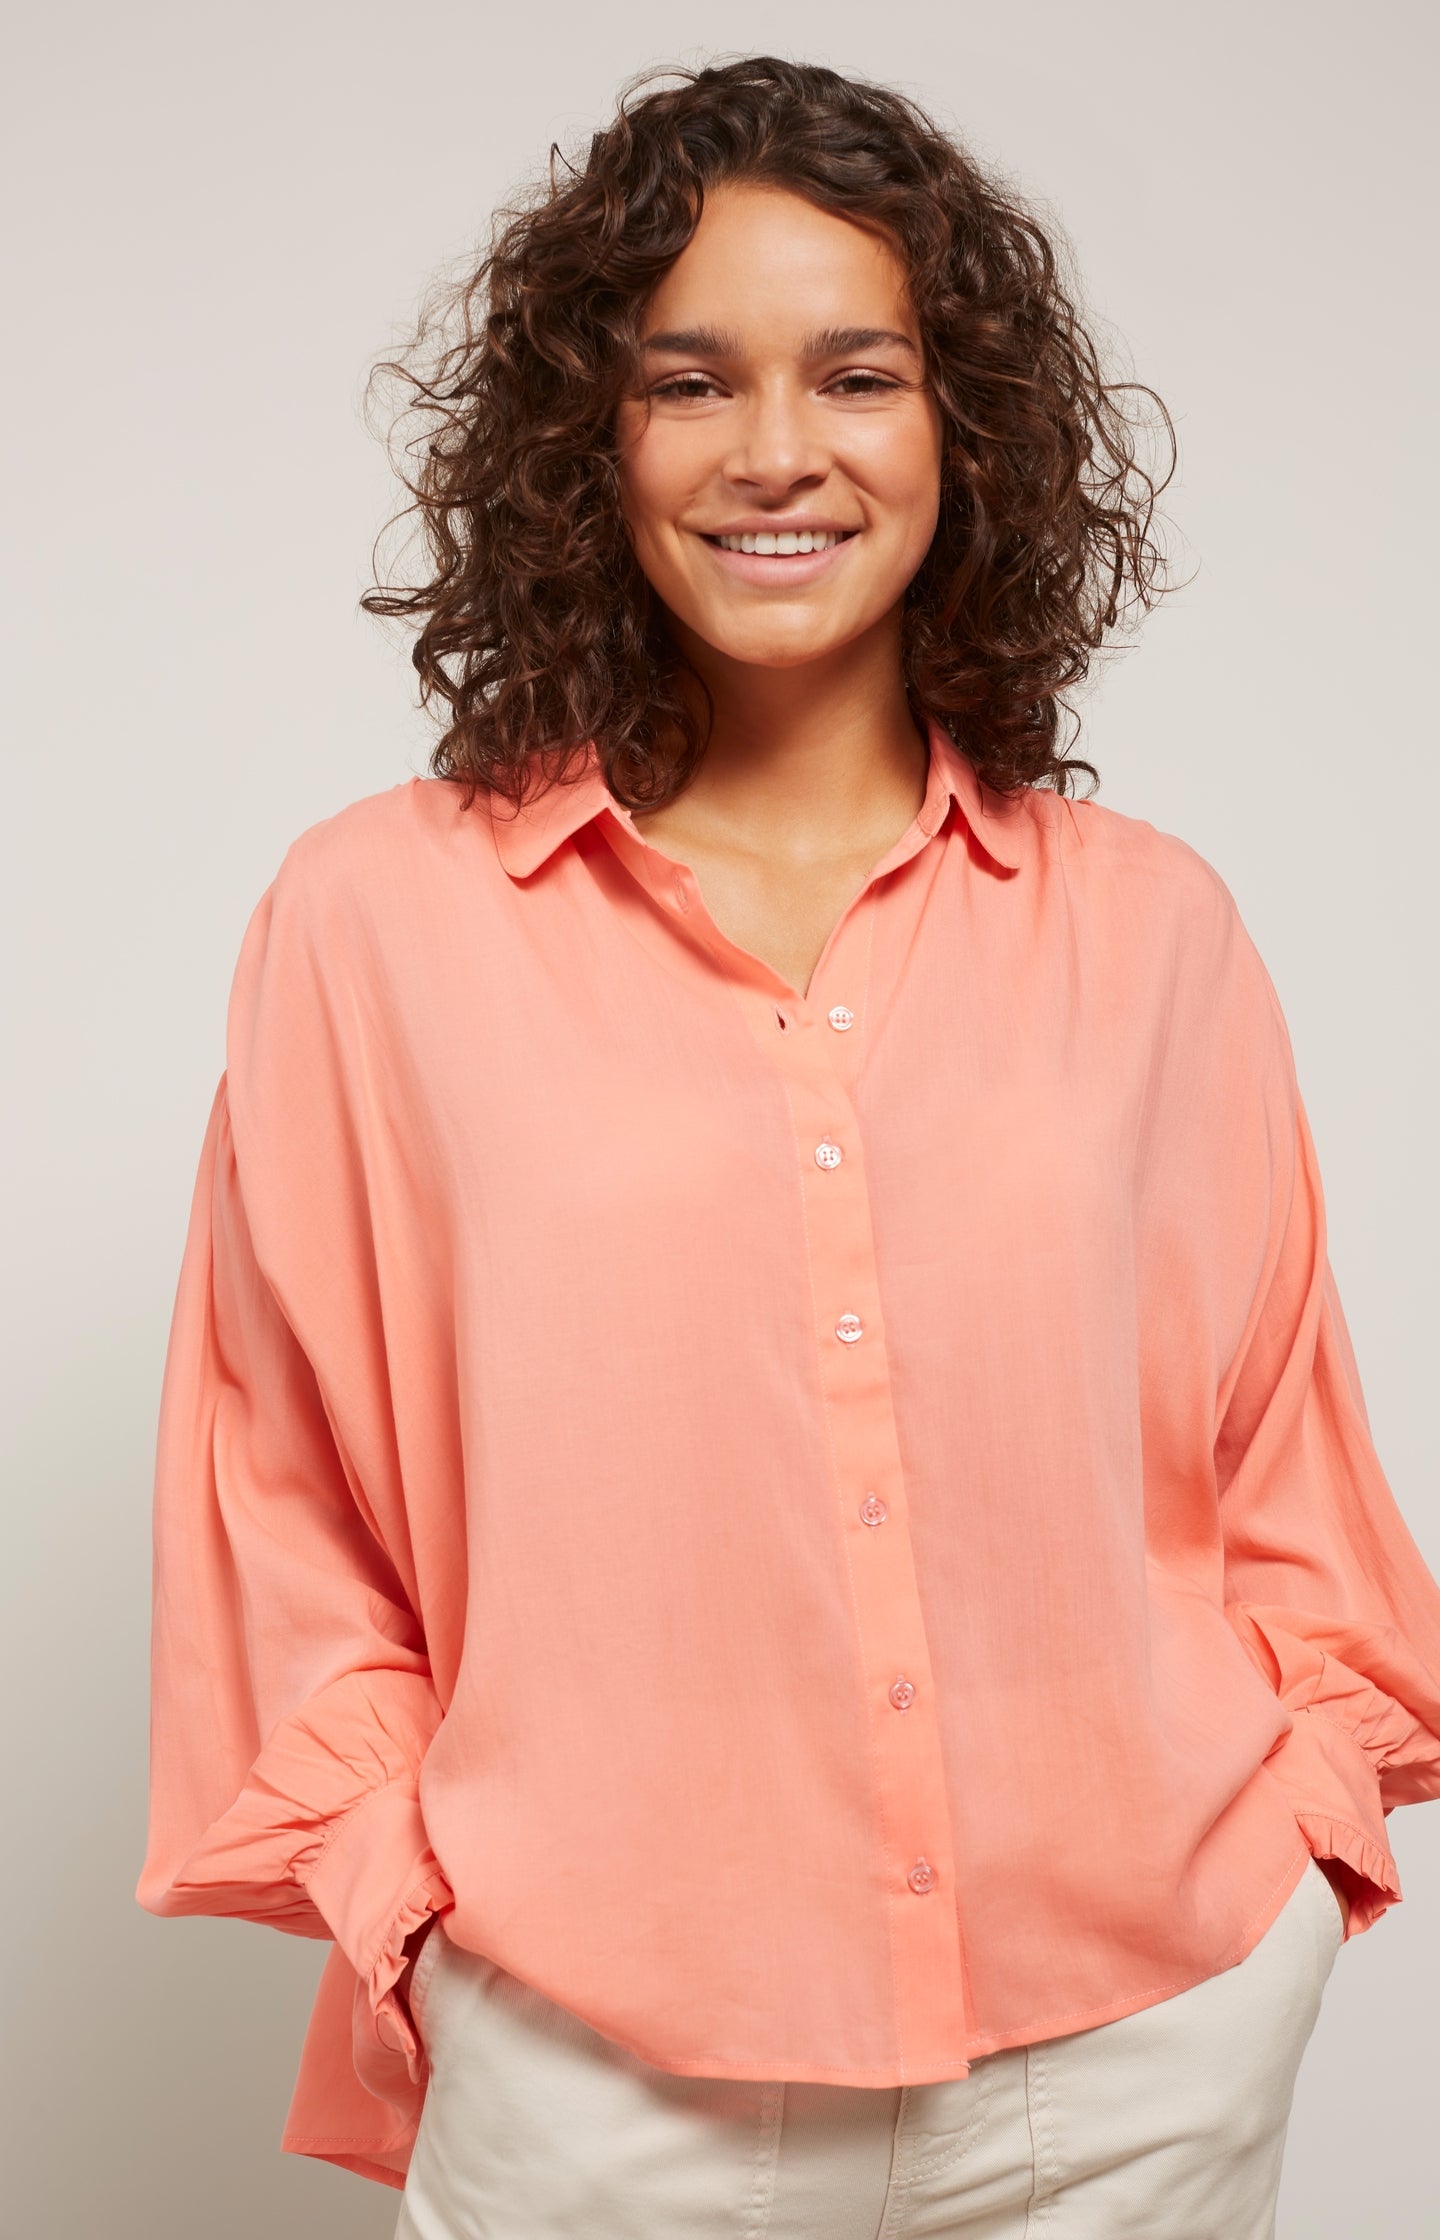 Blouse with long balloon sleeves, buttons and pleated detail - Type: lookbook